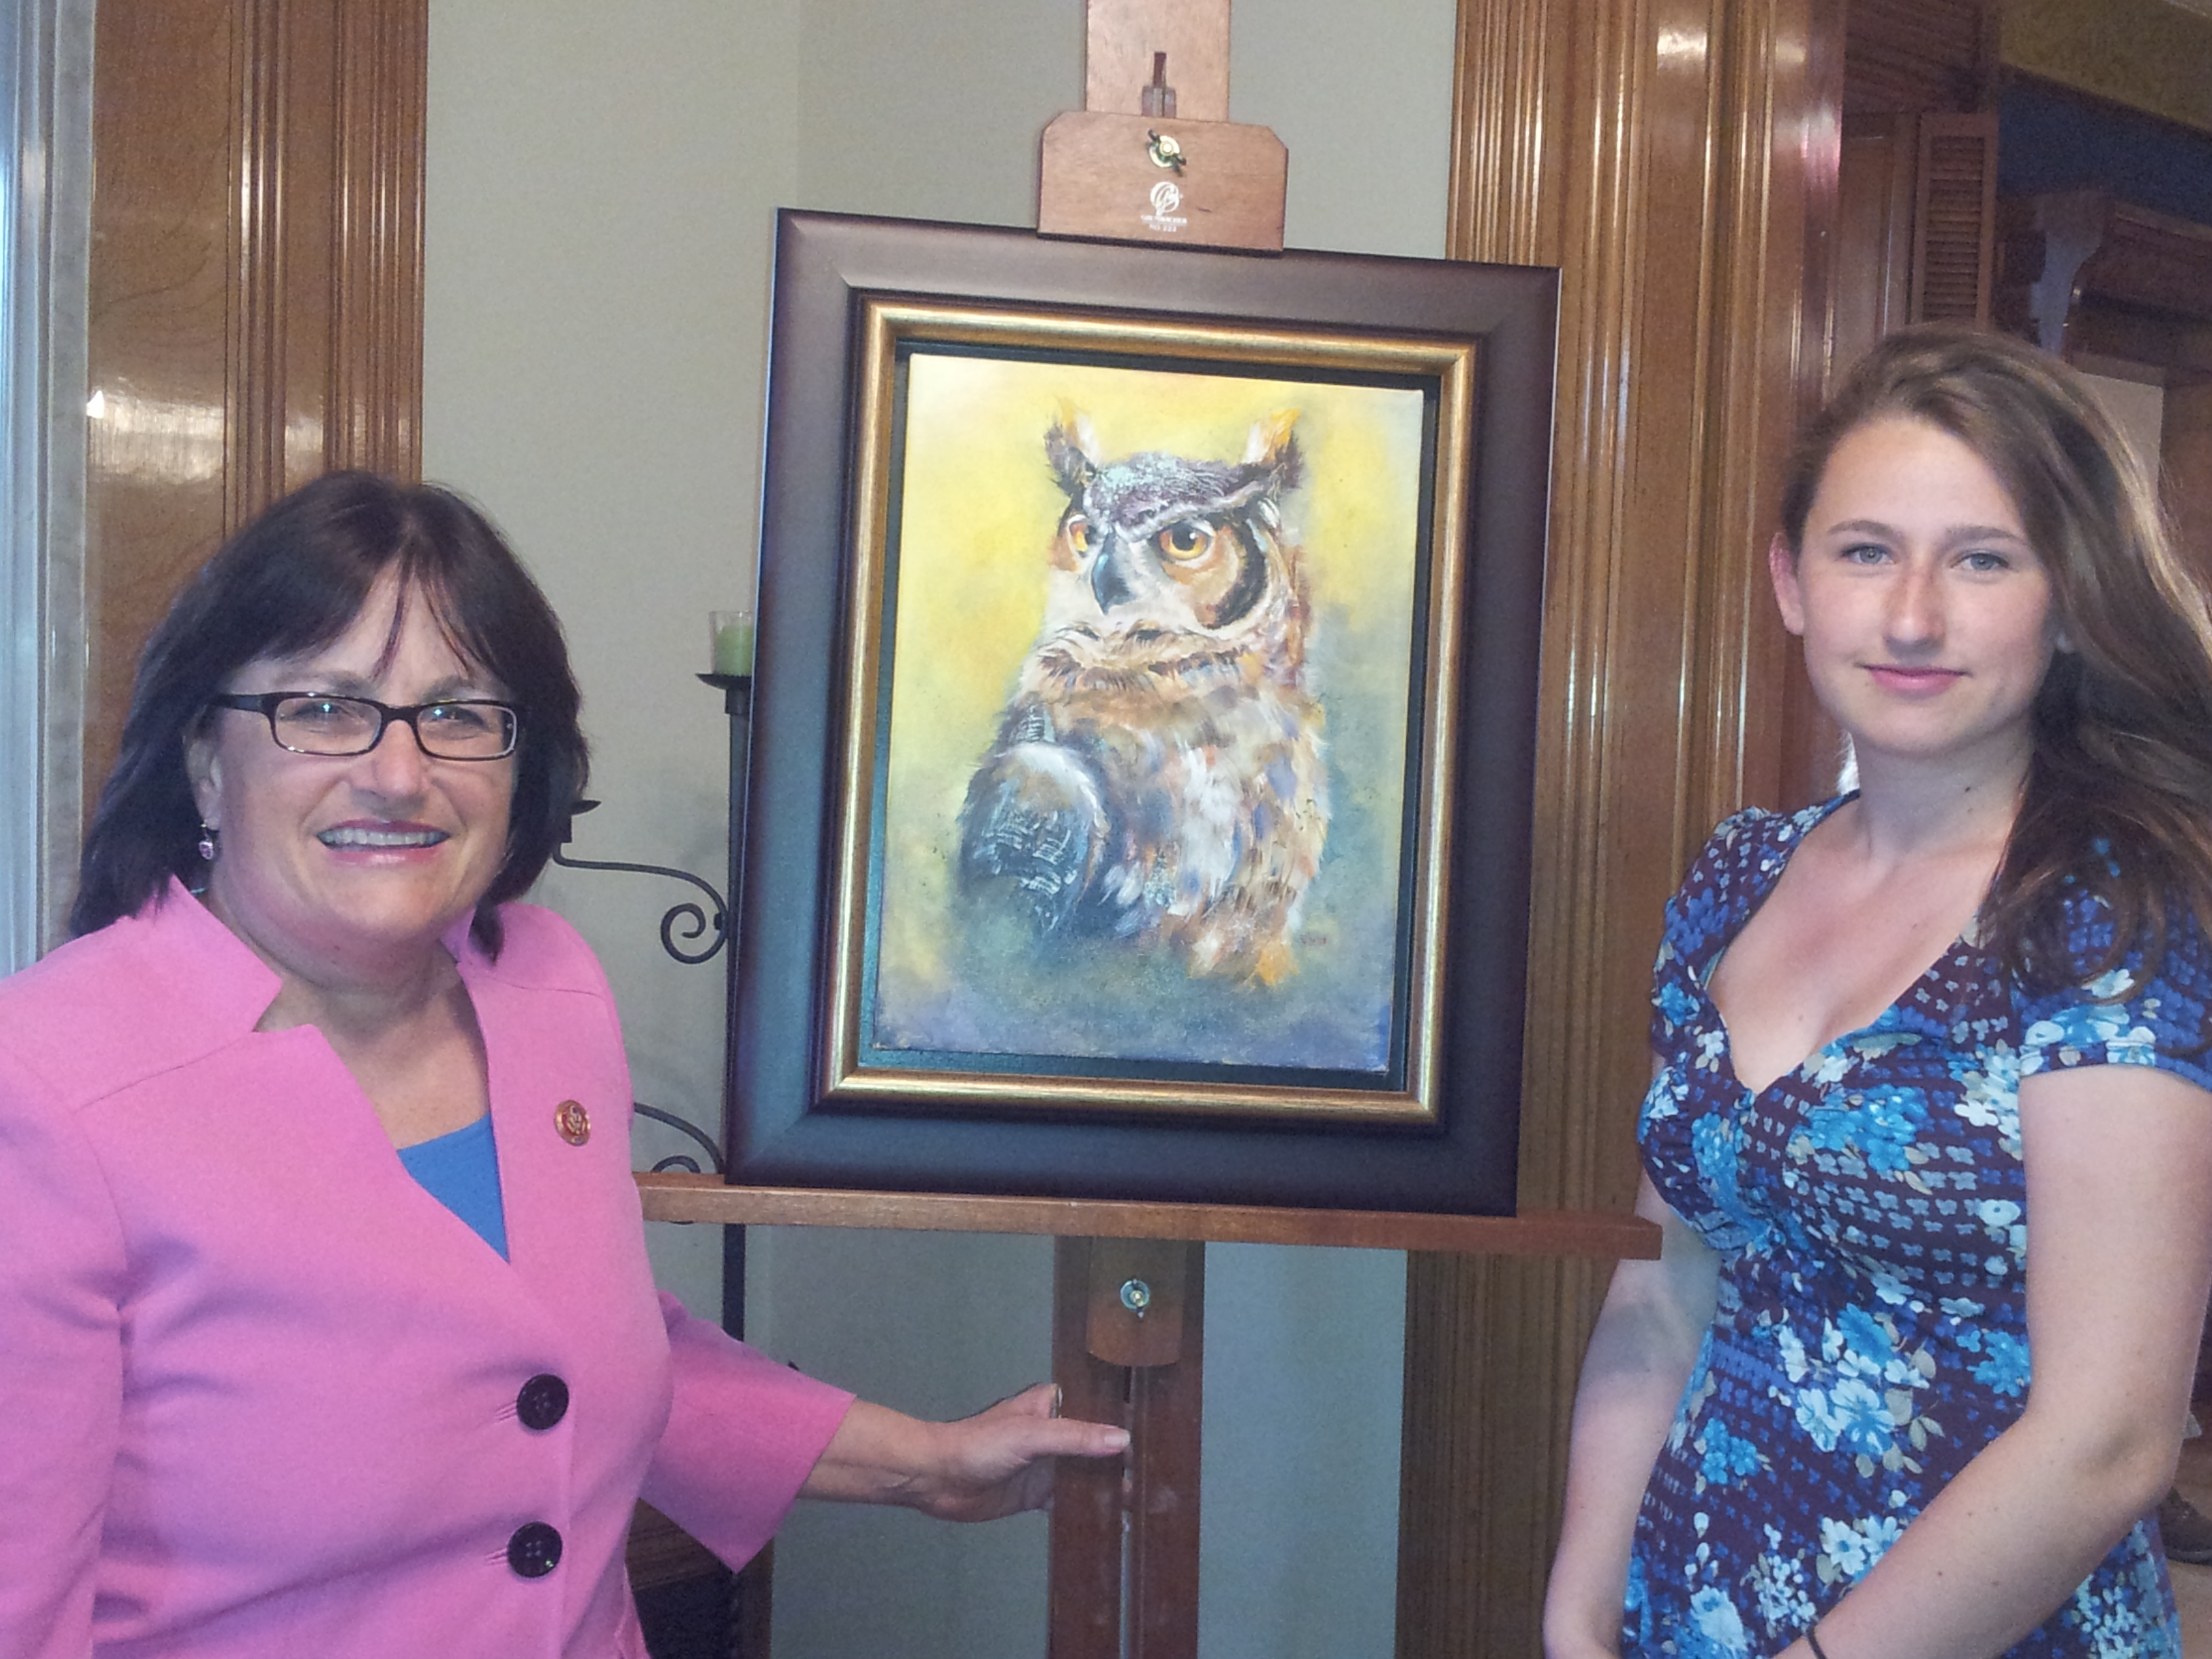 Congresswoman Kuster congratulates this year’s Congressional Art Competition winner